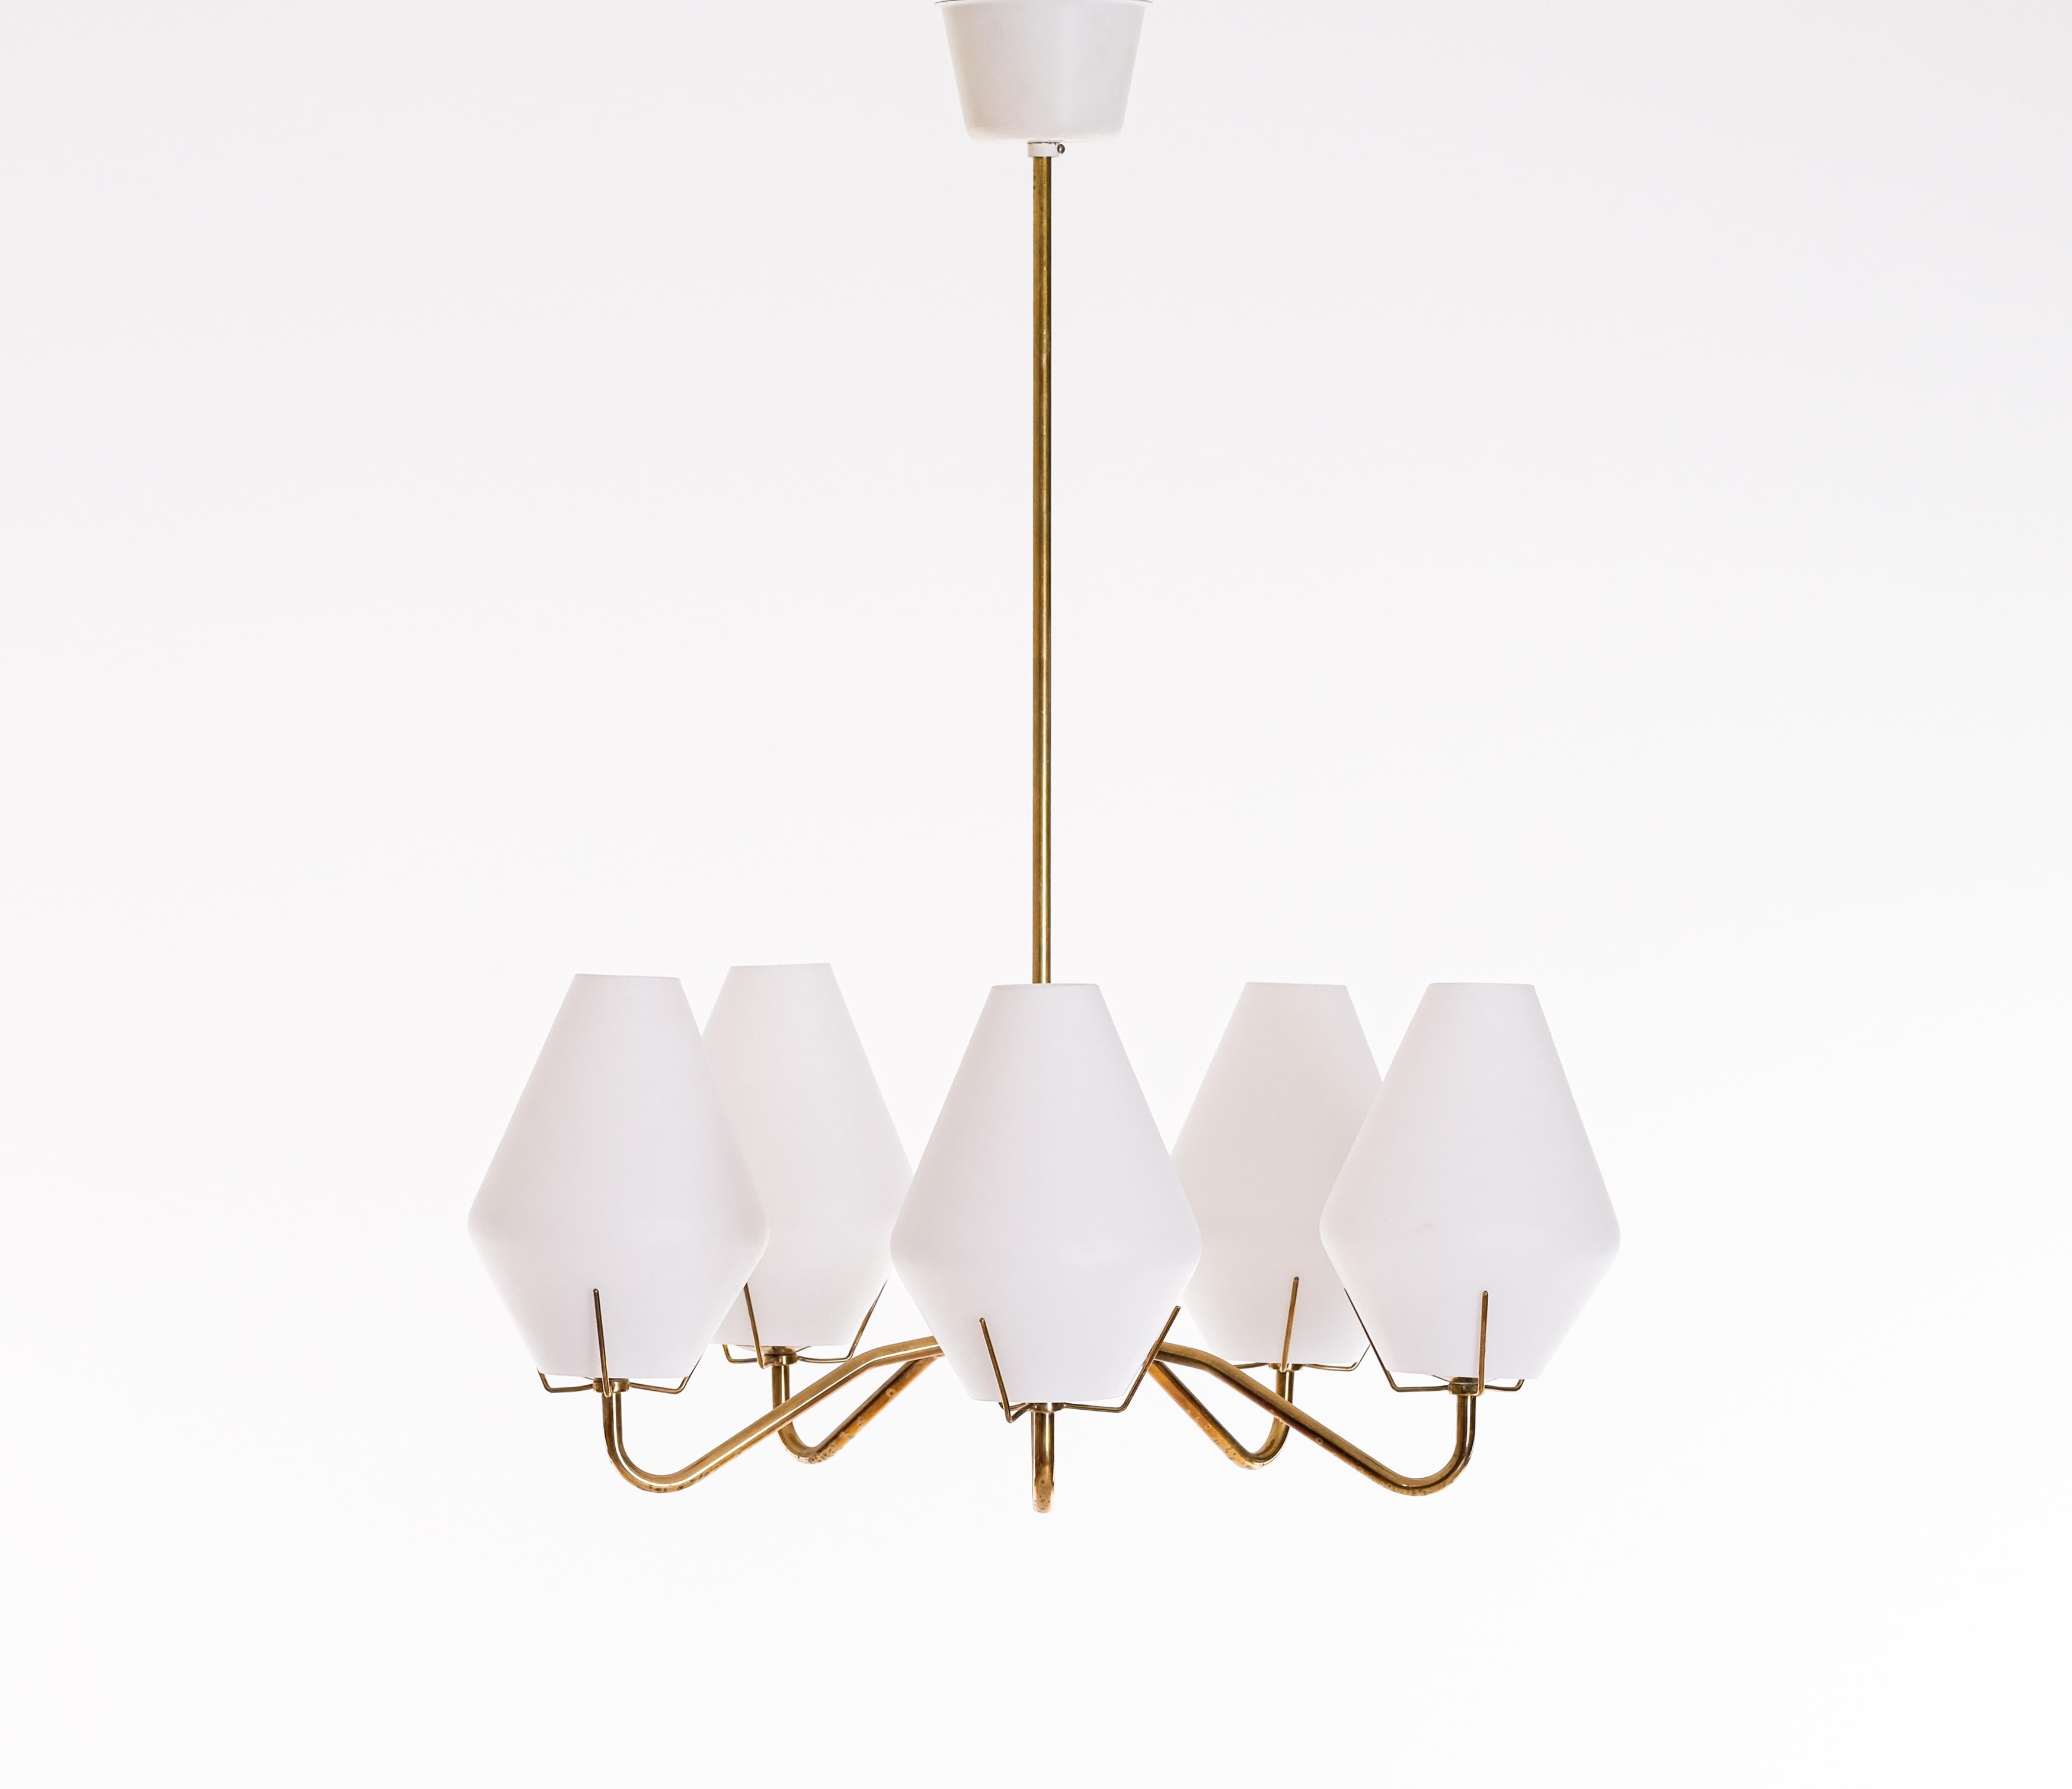 Swedish Set of 2 Brass Chandeliers by ASEA, Sweden, 1950s For Sale